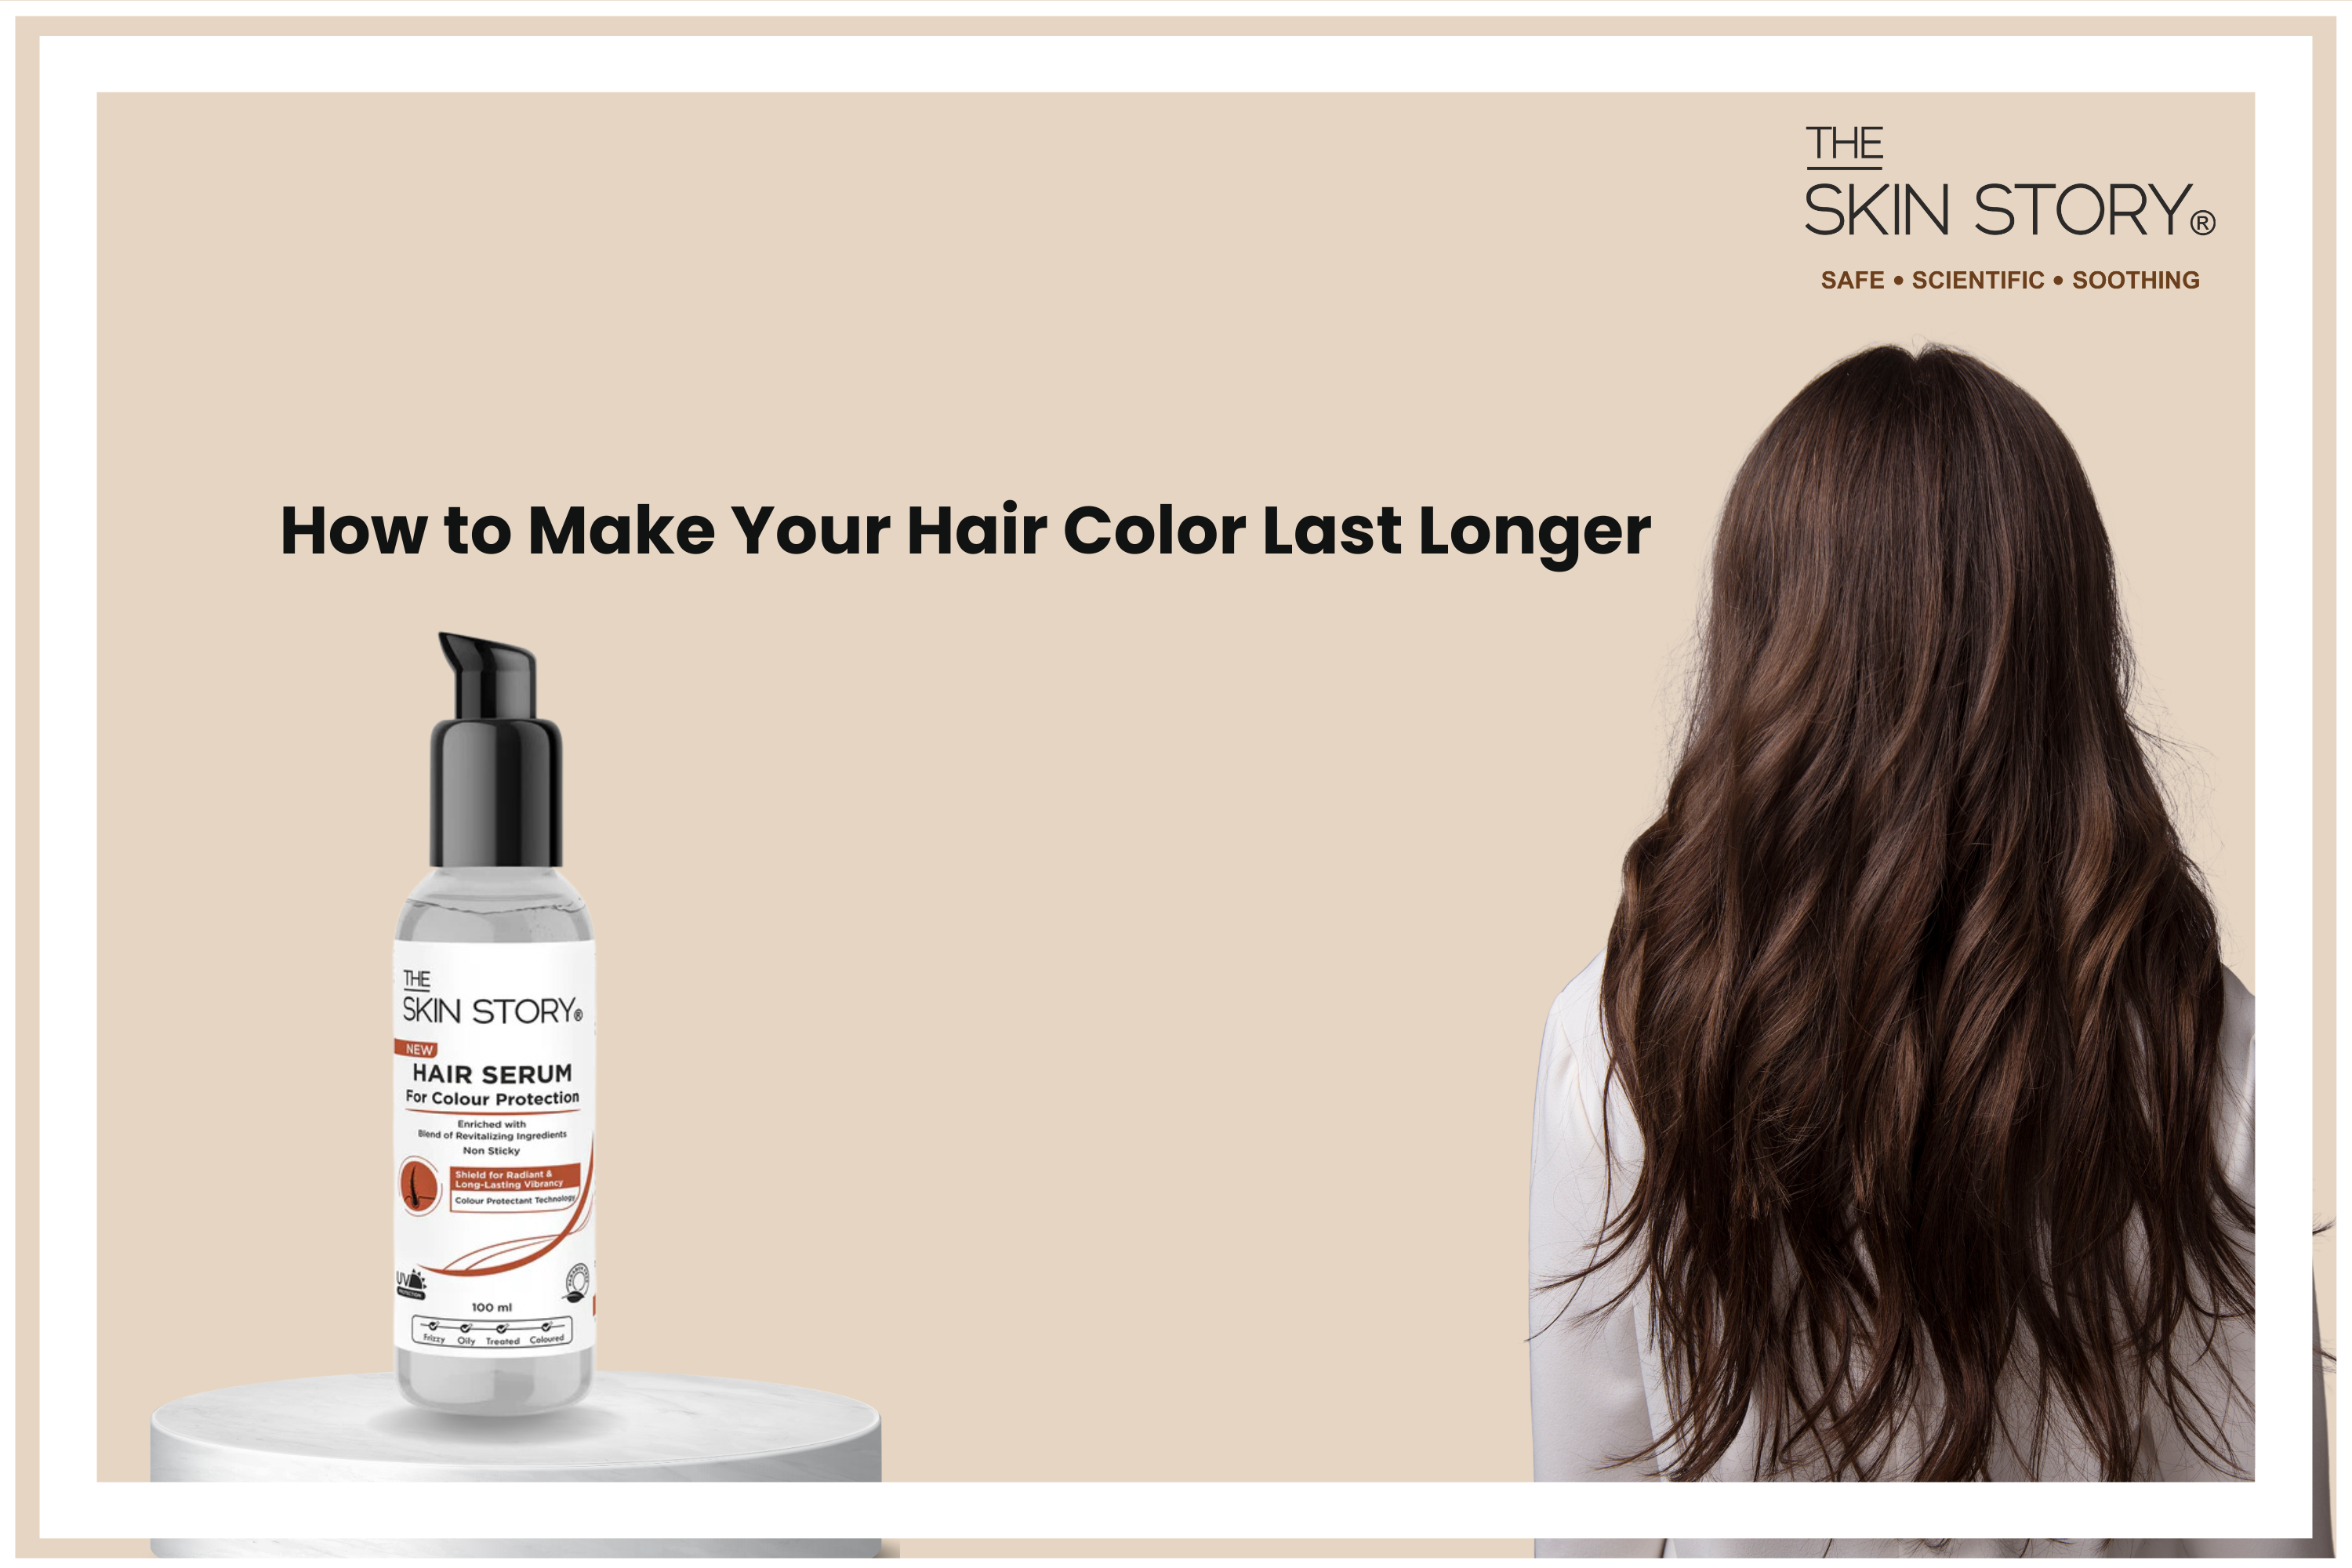 How to Make Your Hair Color Last Longer